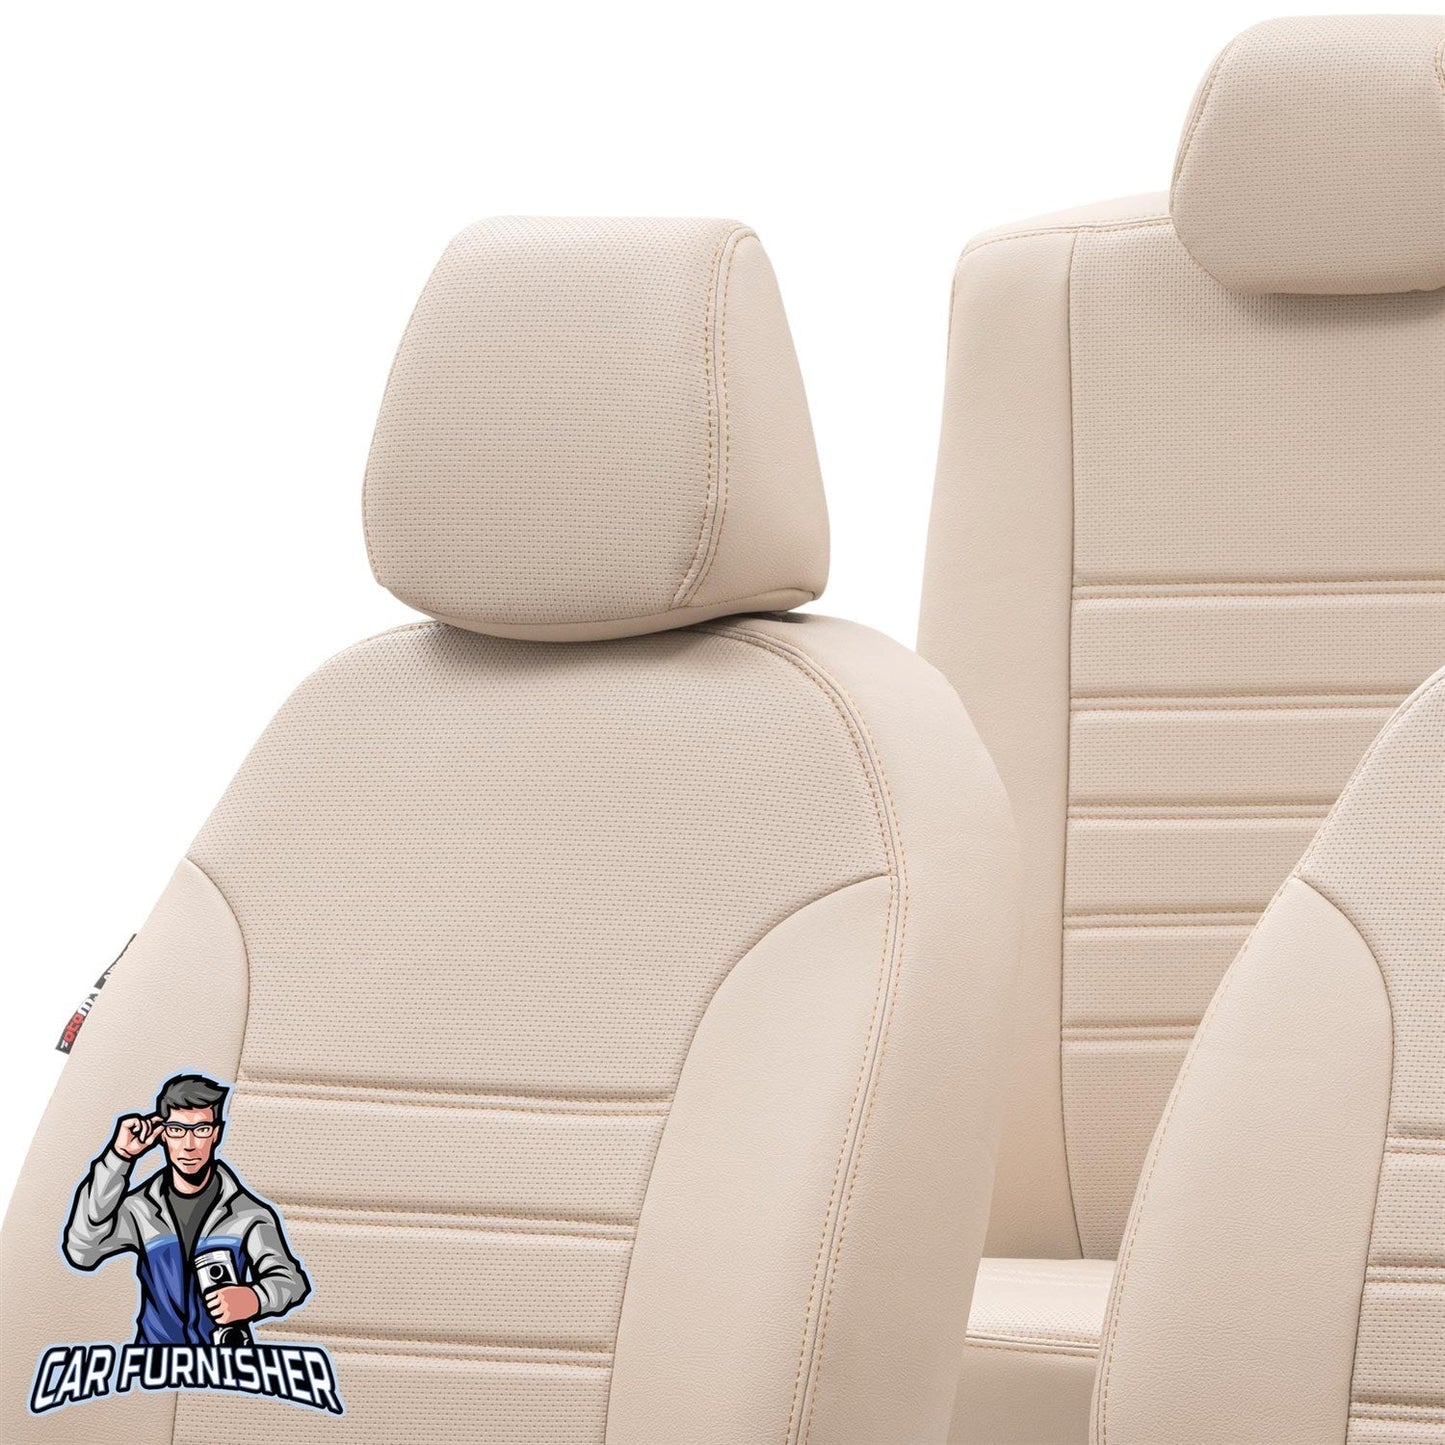 Honda Jazz Seat Covers New York Leather Design Beige Leather